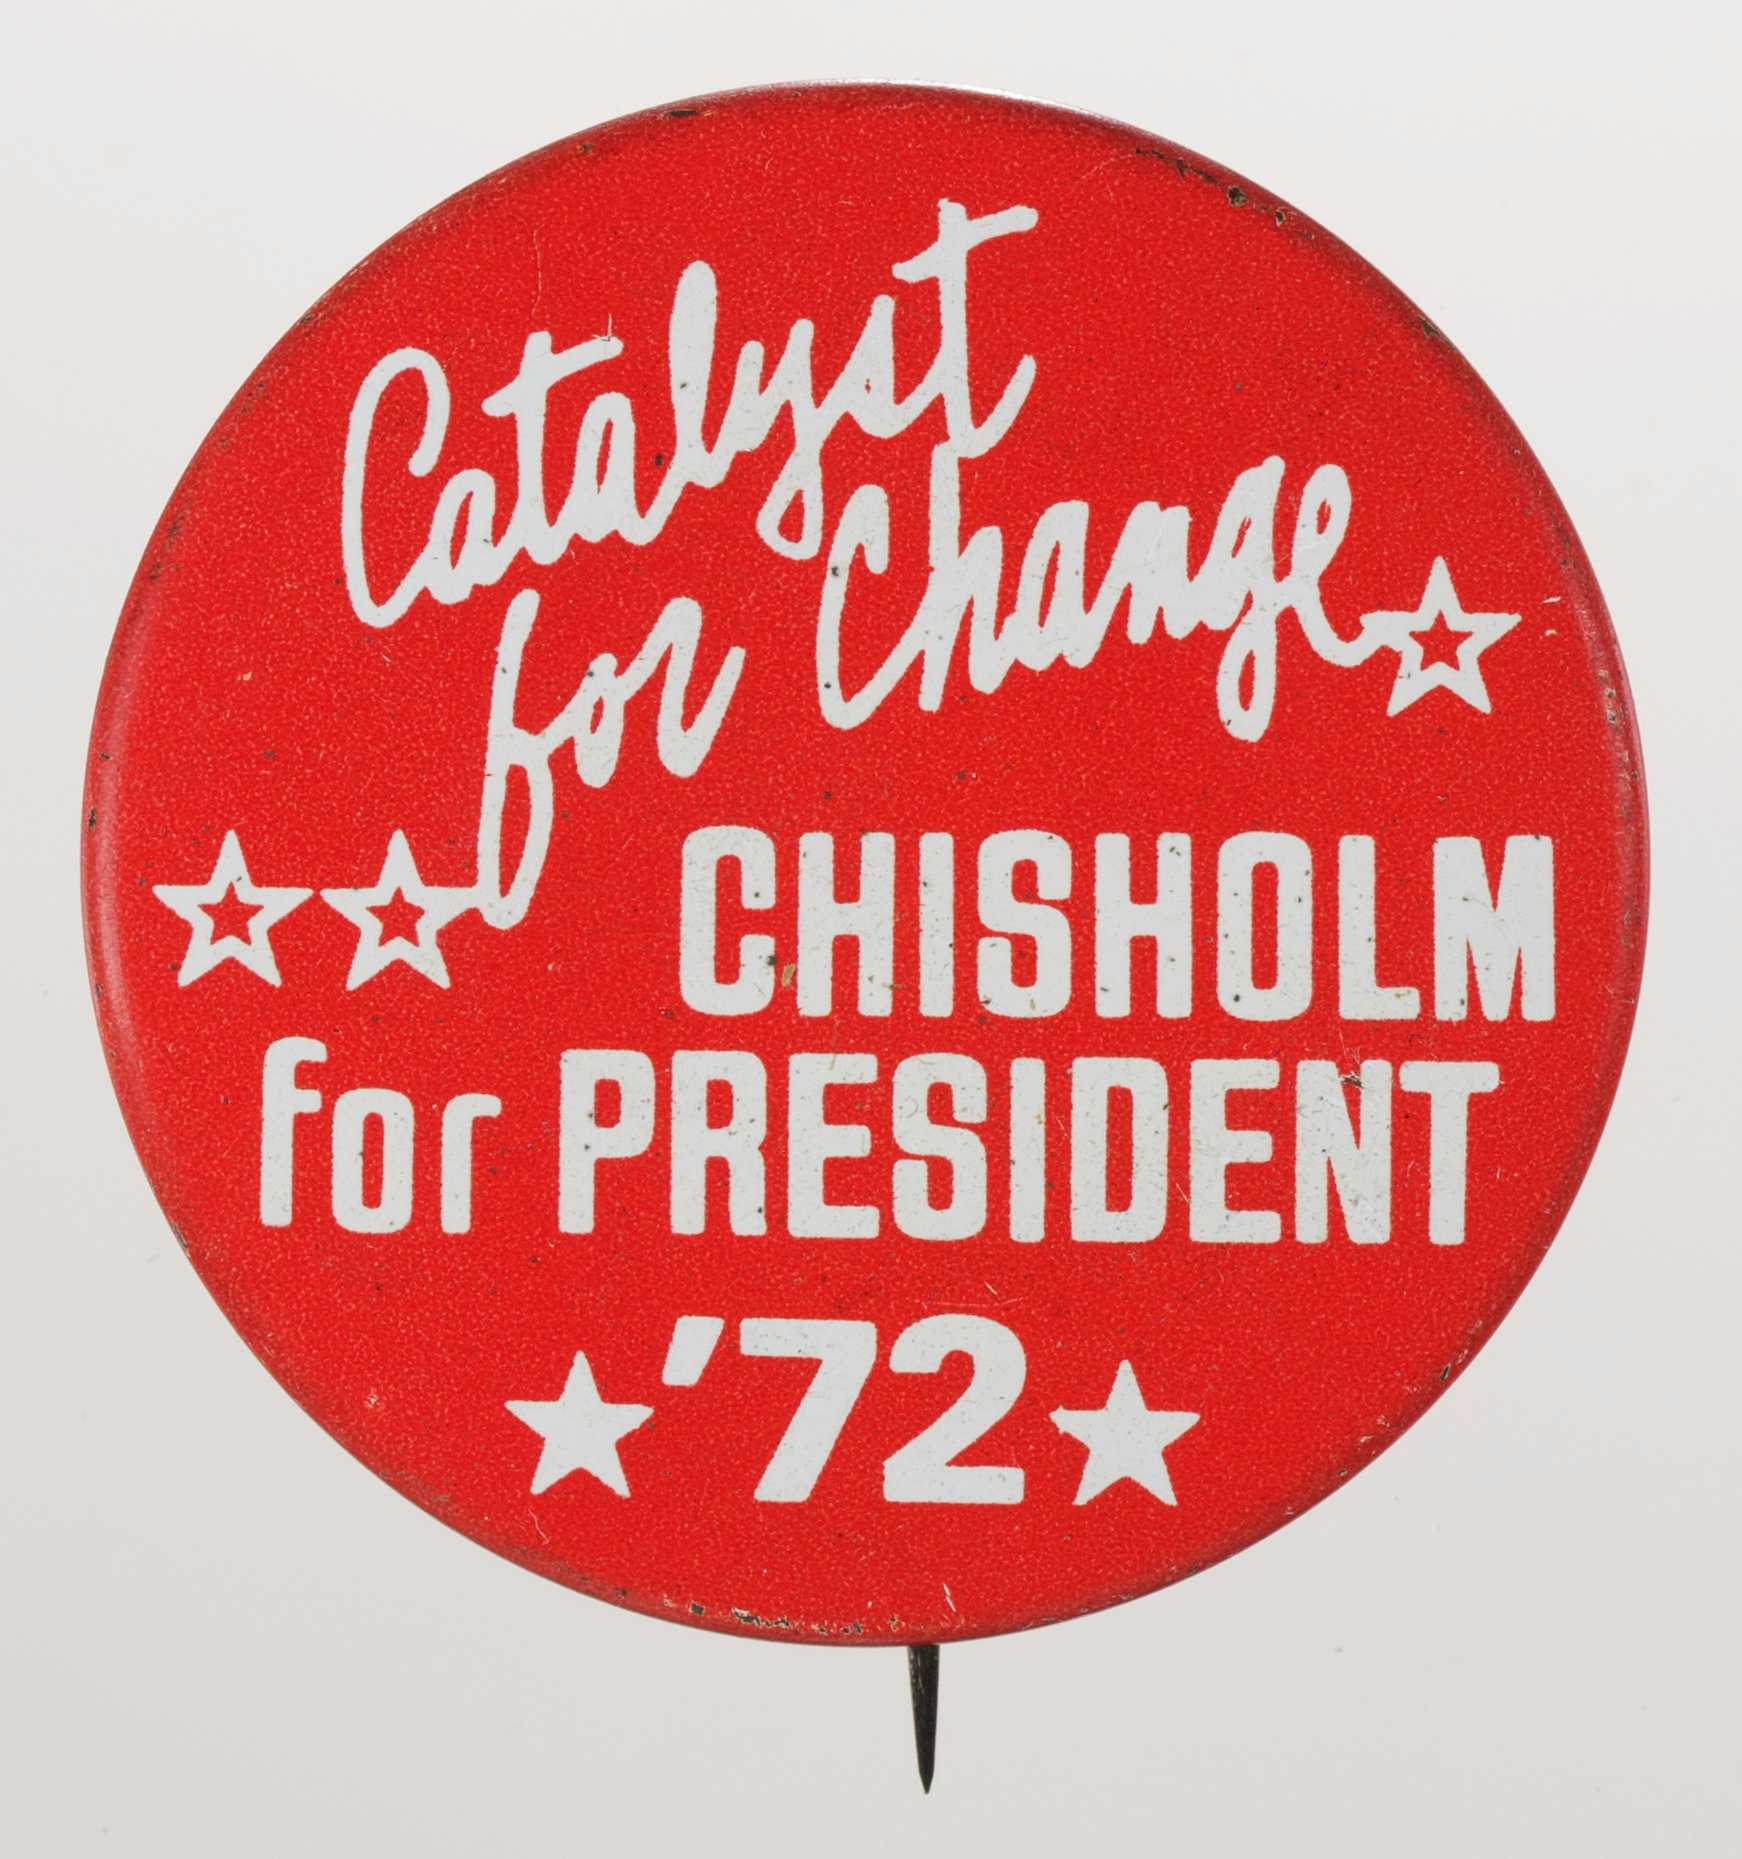 A circular metal pin-back button. The button has a red background with white type that reads: [Catalyst / for Change / CHISHOLM / for PRESIDENT / '72] in different fonts. Outlined and filled-in stars surround the text. The edge of the button has two logo designs in white. One is a diamond shape with the text: [LPIU] in the middle of the diamond. The other logo has a wheel like symbol and has text on either side. The back of the button is gold in color and has a single pin without a clasp.